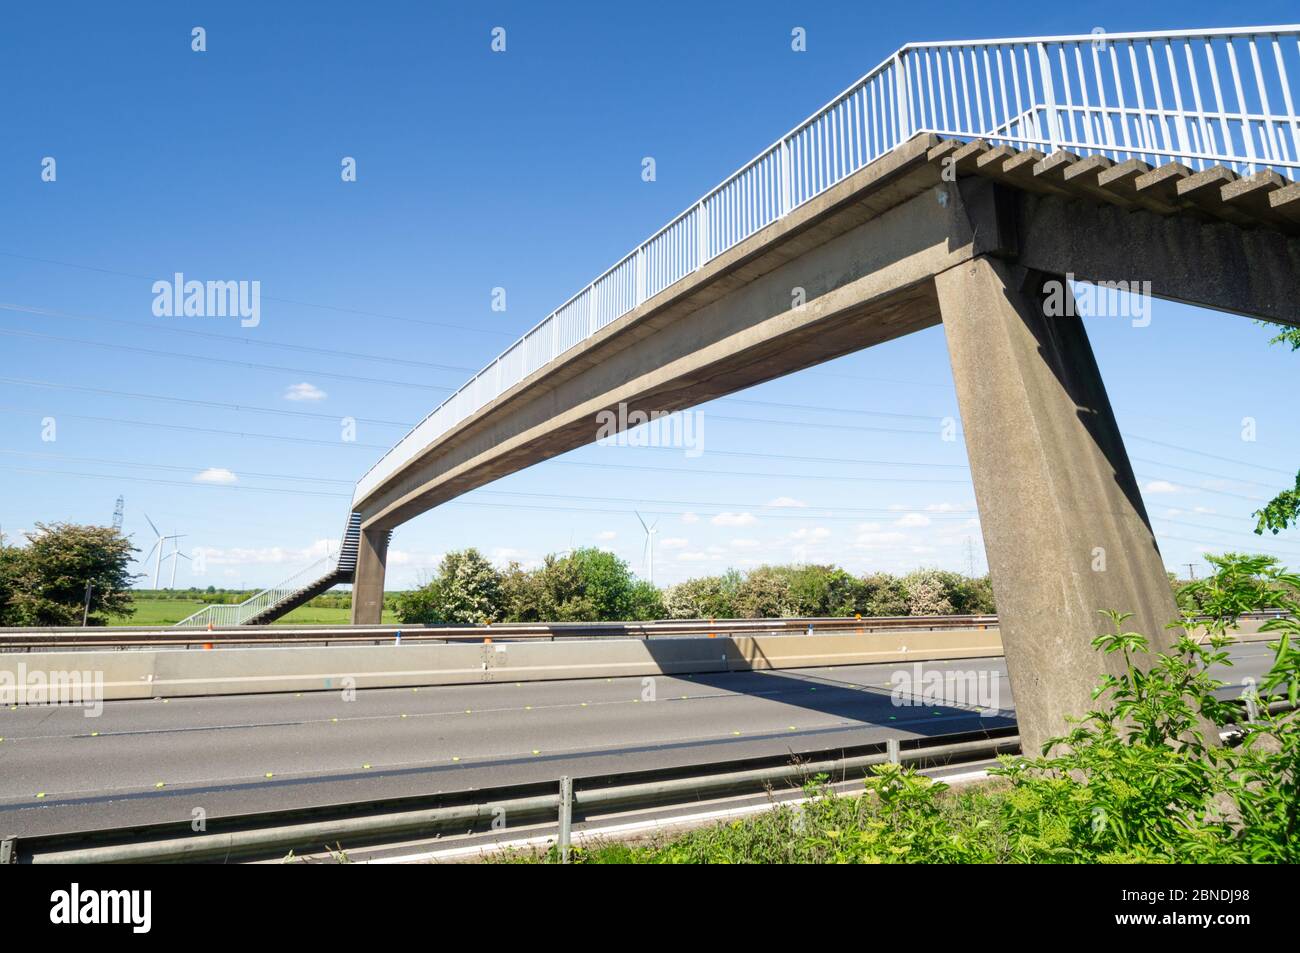 Motorway bridge over the M56 near Frodsham, empty with no traffic and blue sky with wind turbines, Cheshire, England, UK Stock Photo